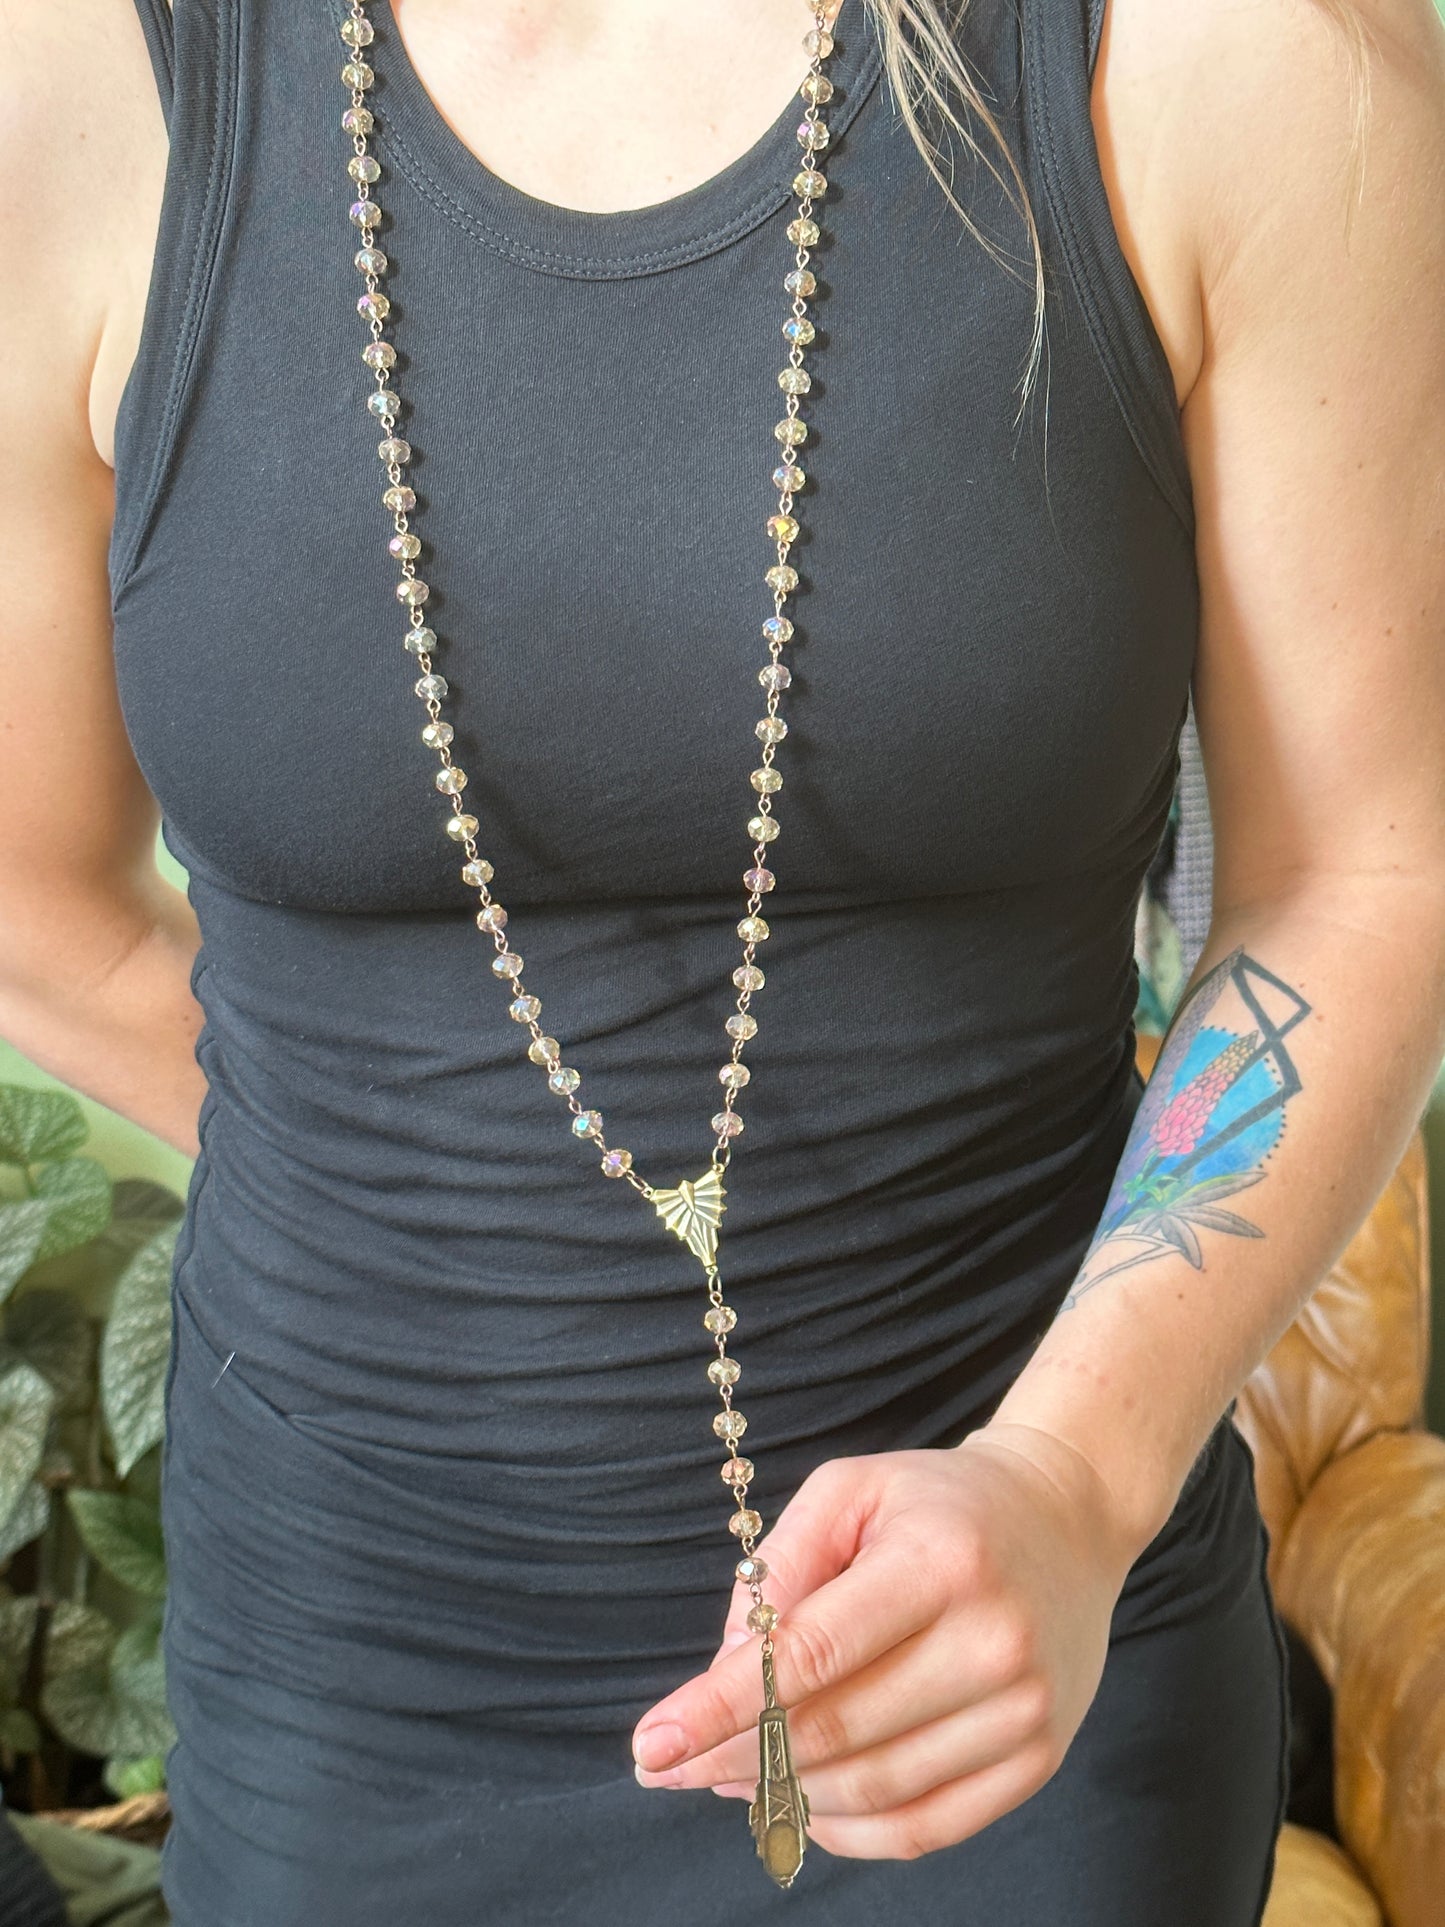 "Champagne Party" Boho Beaded Chain Necklace